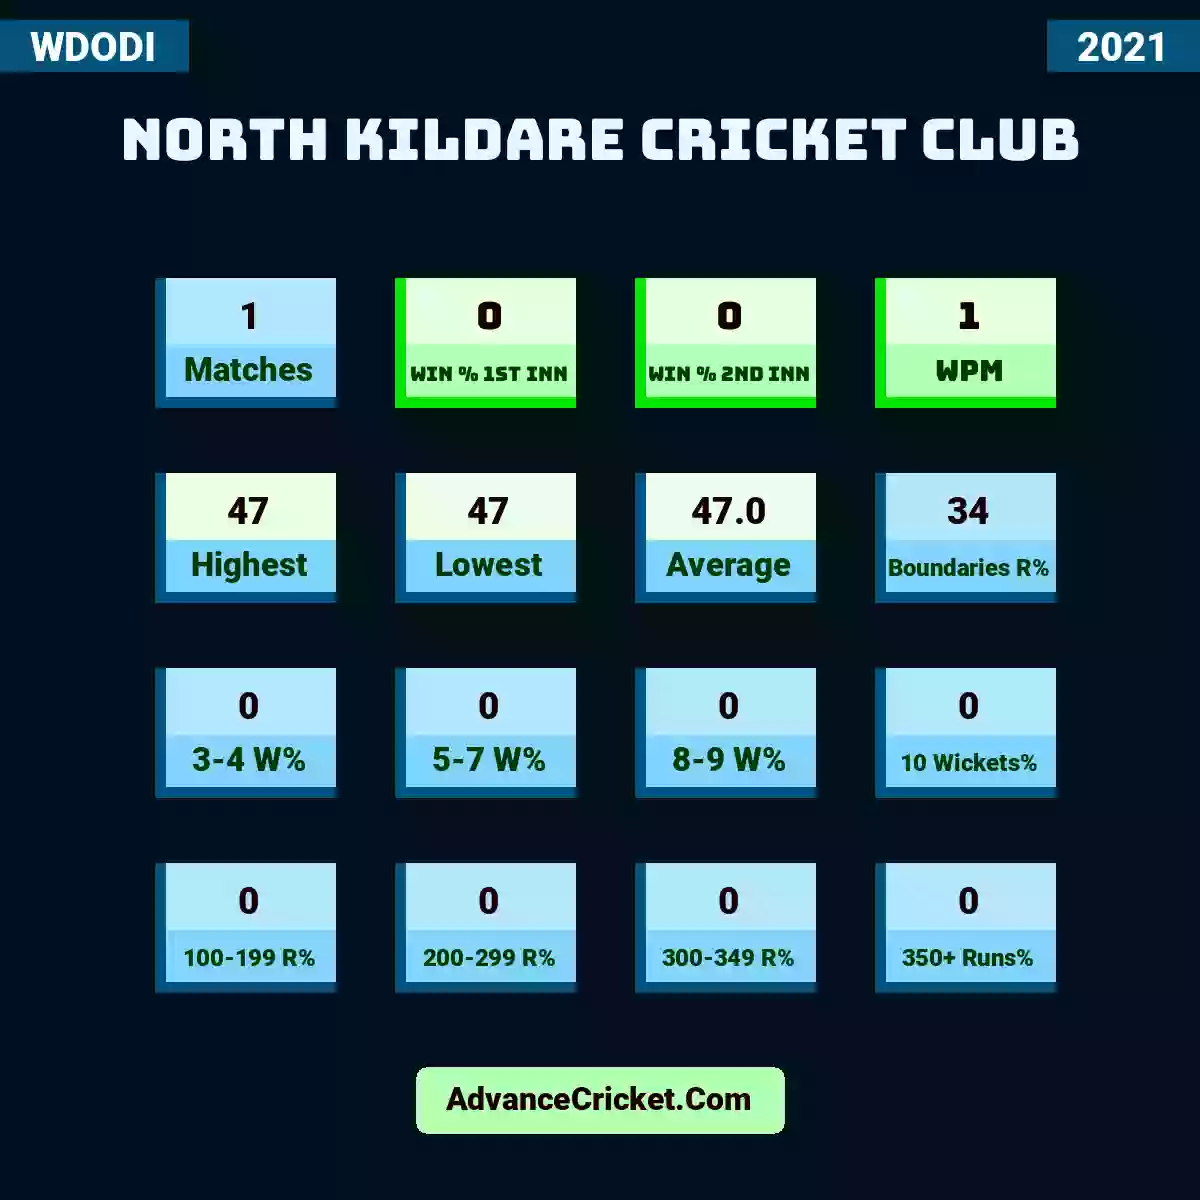 Image showing North Kildare cricket club with Matches: 1, Win % 1st Inn: 0, Win % 2nd Inn: 0, WPM: 1, Highest: 47, Lowest: 47, Average: 47.0, Boundaries R%: 34, 3-4 W%: 0, 5-7 W%: 0, 8-9 W%: 0, 10 Wickets%: 0, 100-199 R%: 0, 200-299 R%: 0, 300-349 R%: 0, 350+ Runs%: 0.